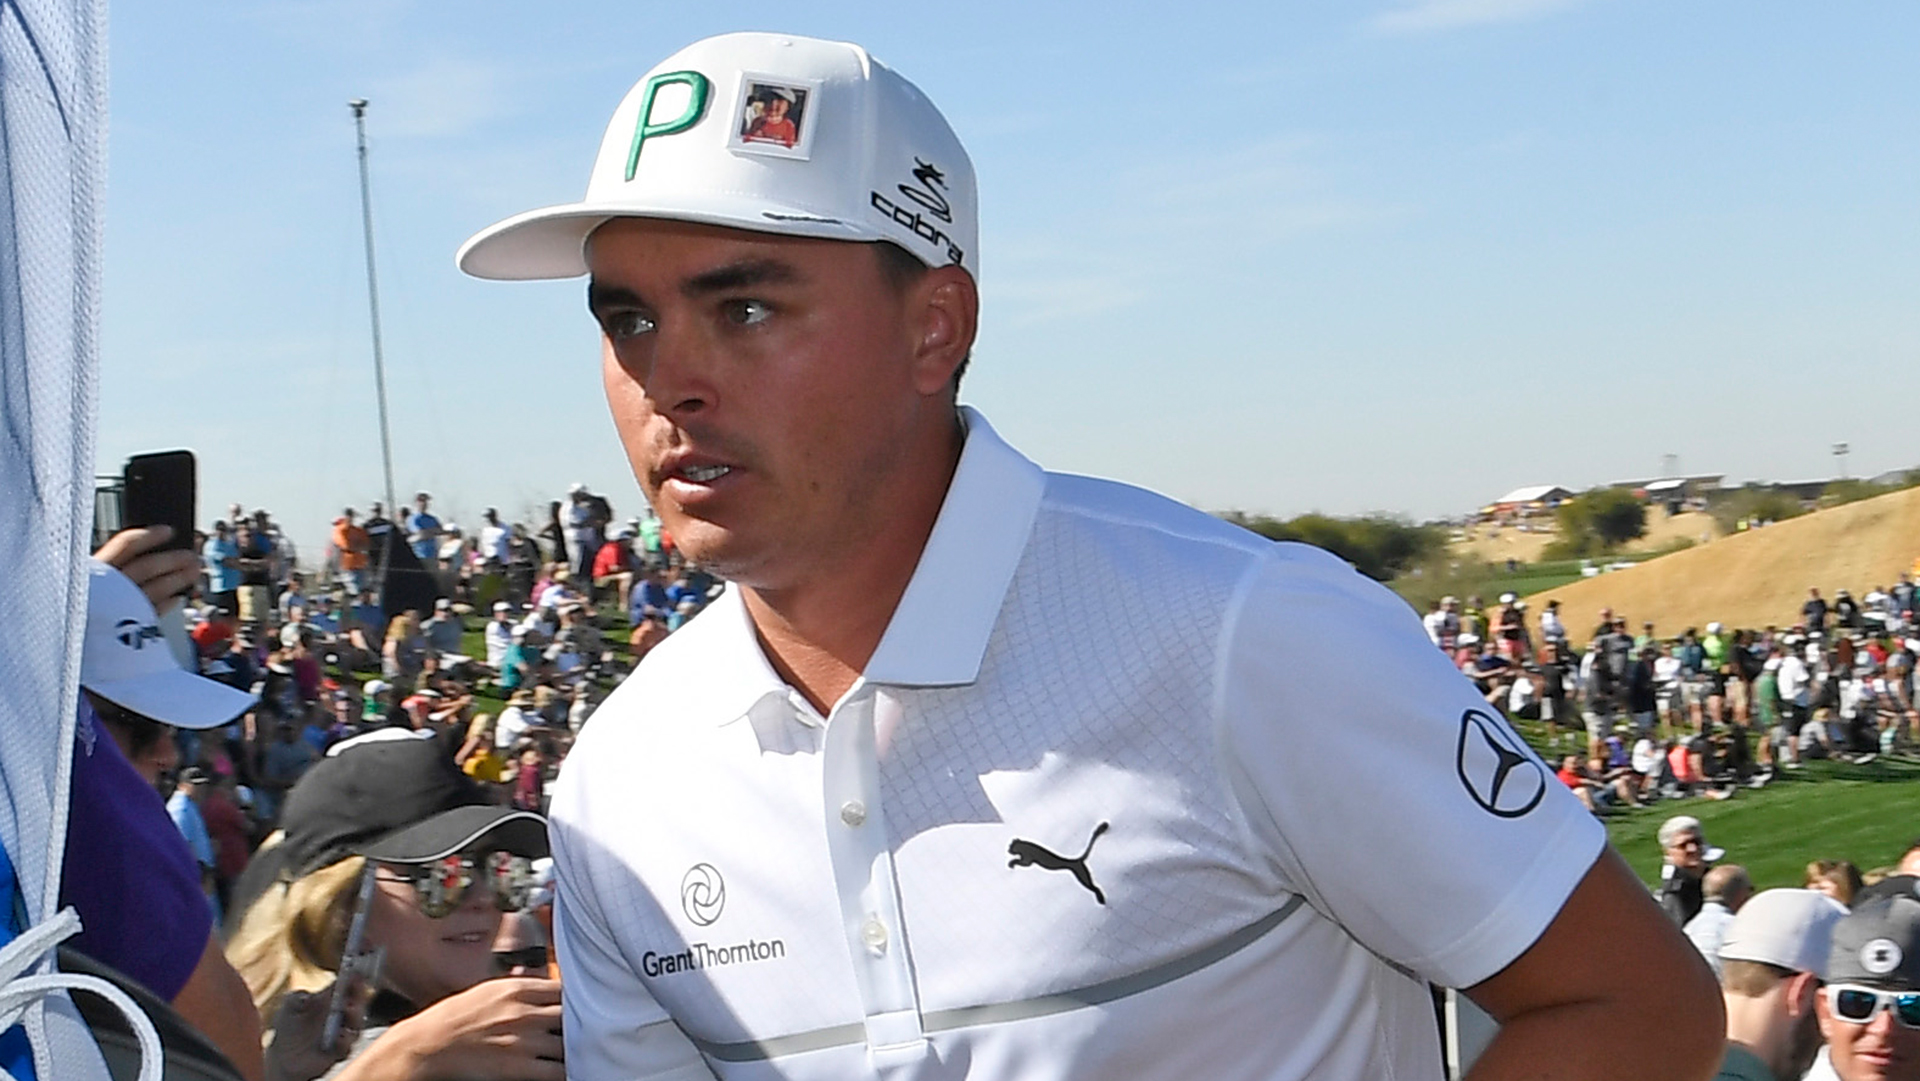 p on rickie fowler's hat